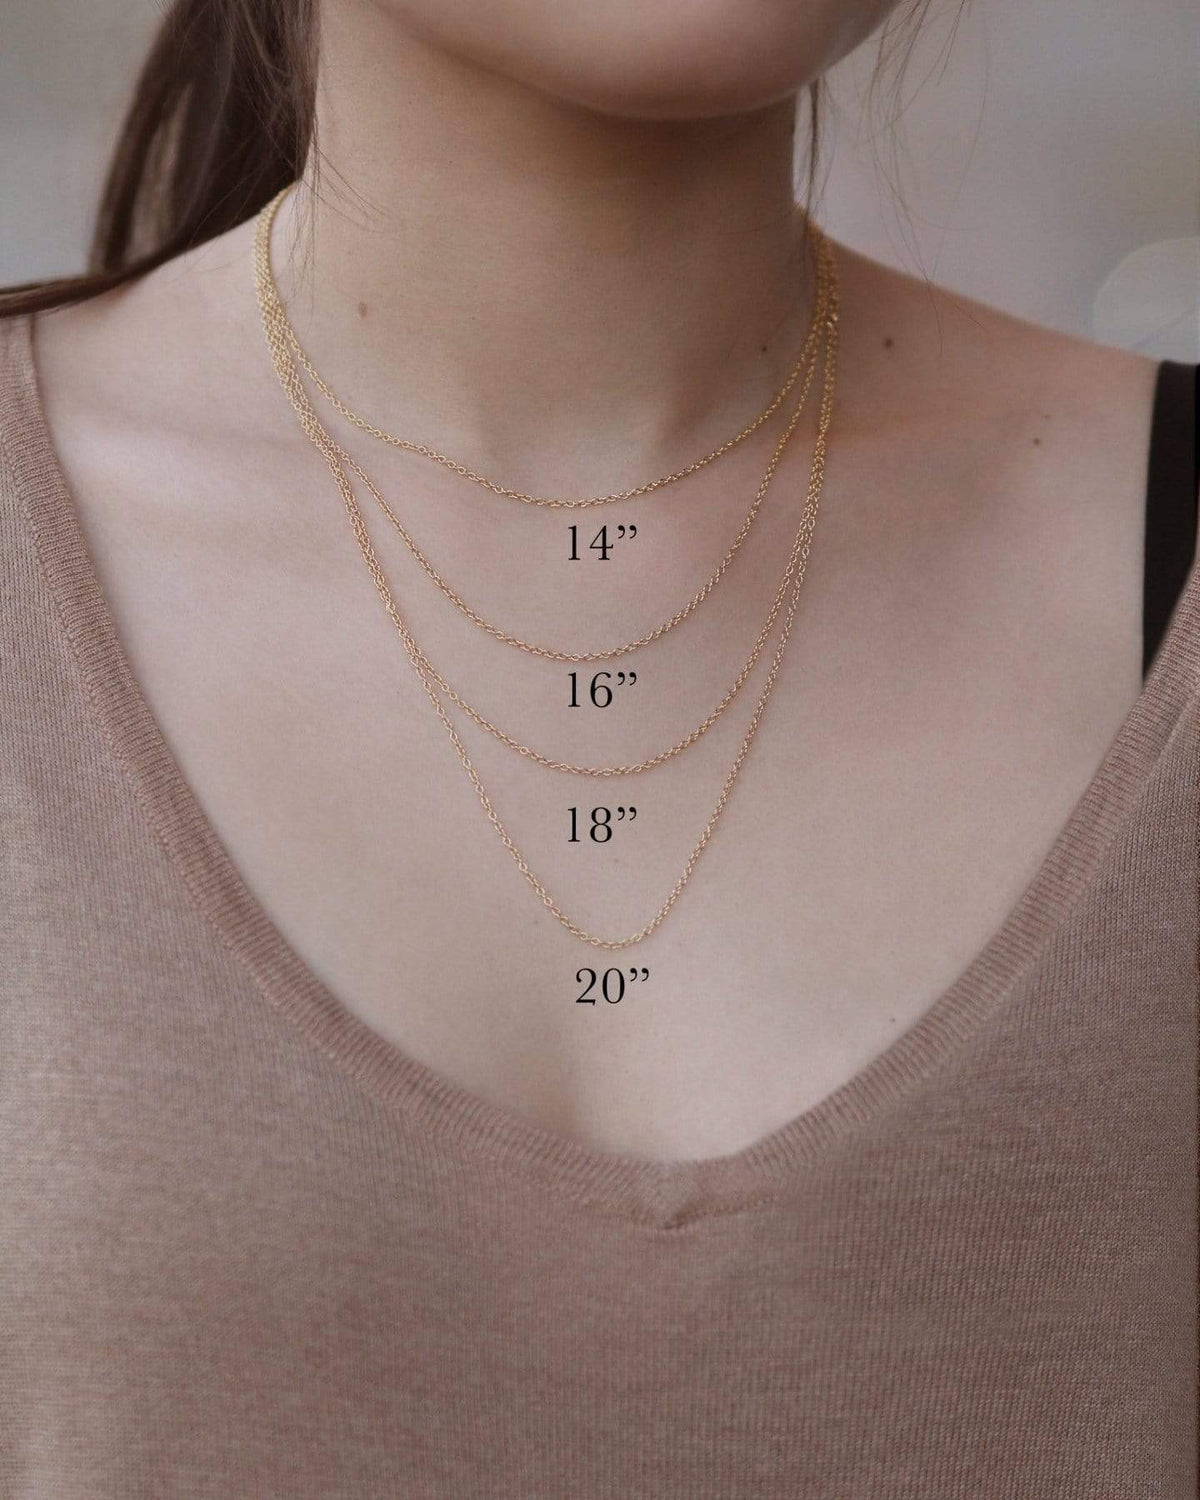 necklace lengths 